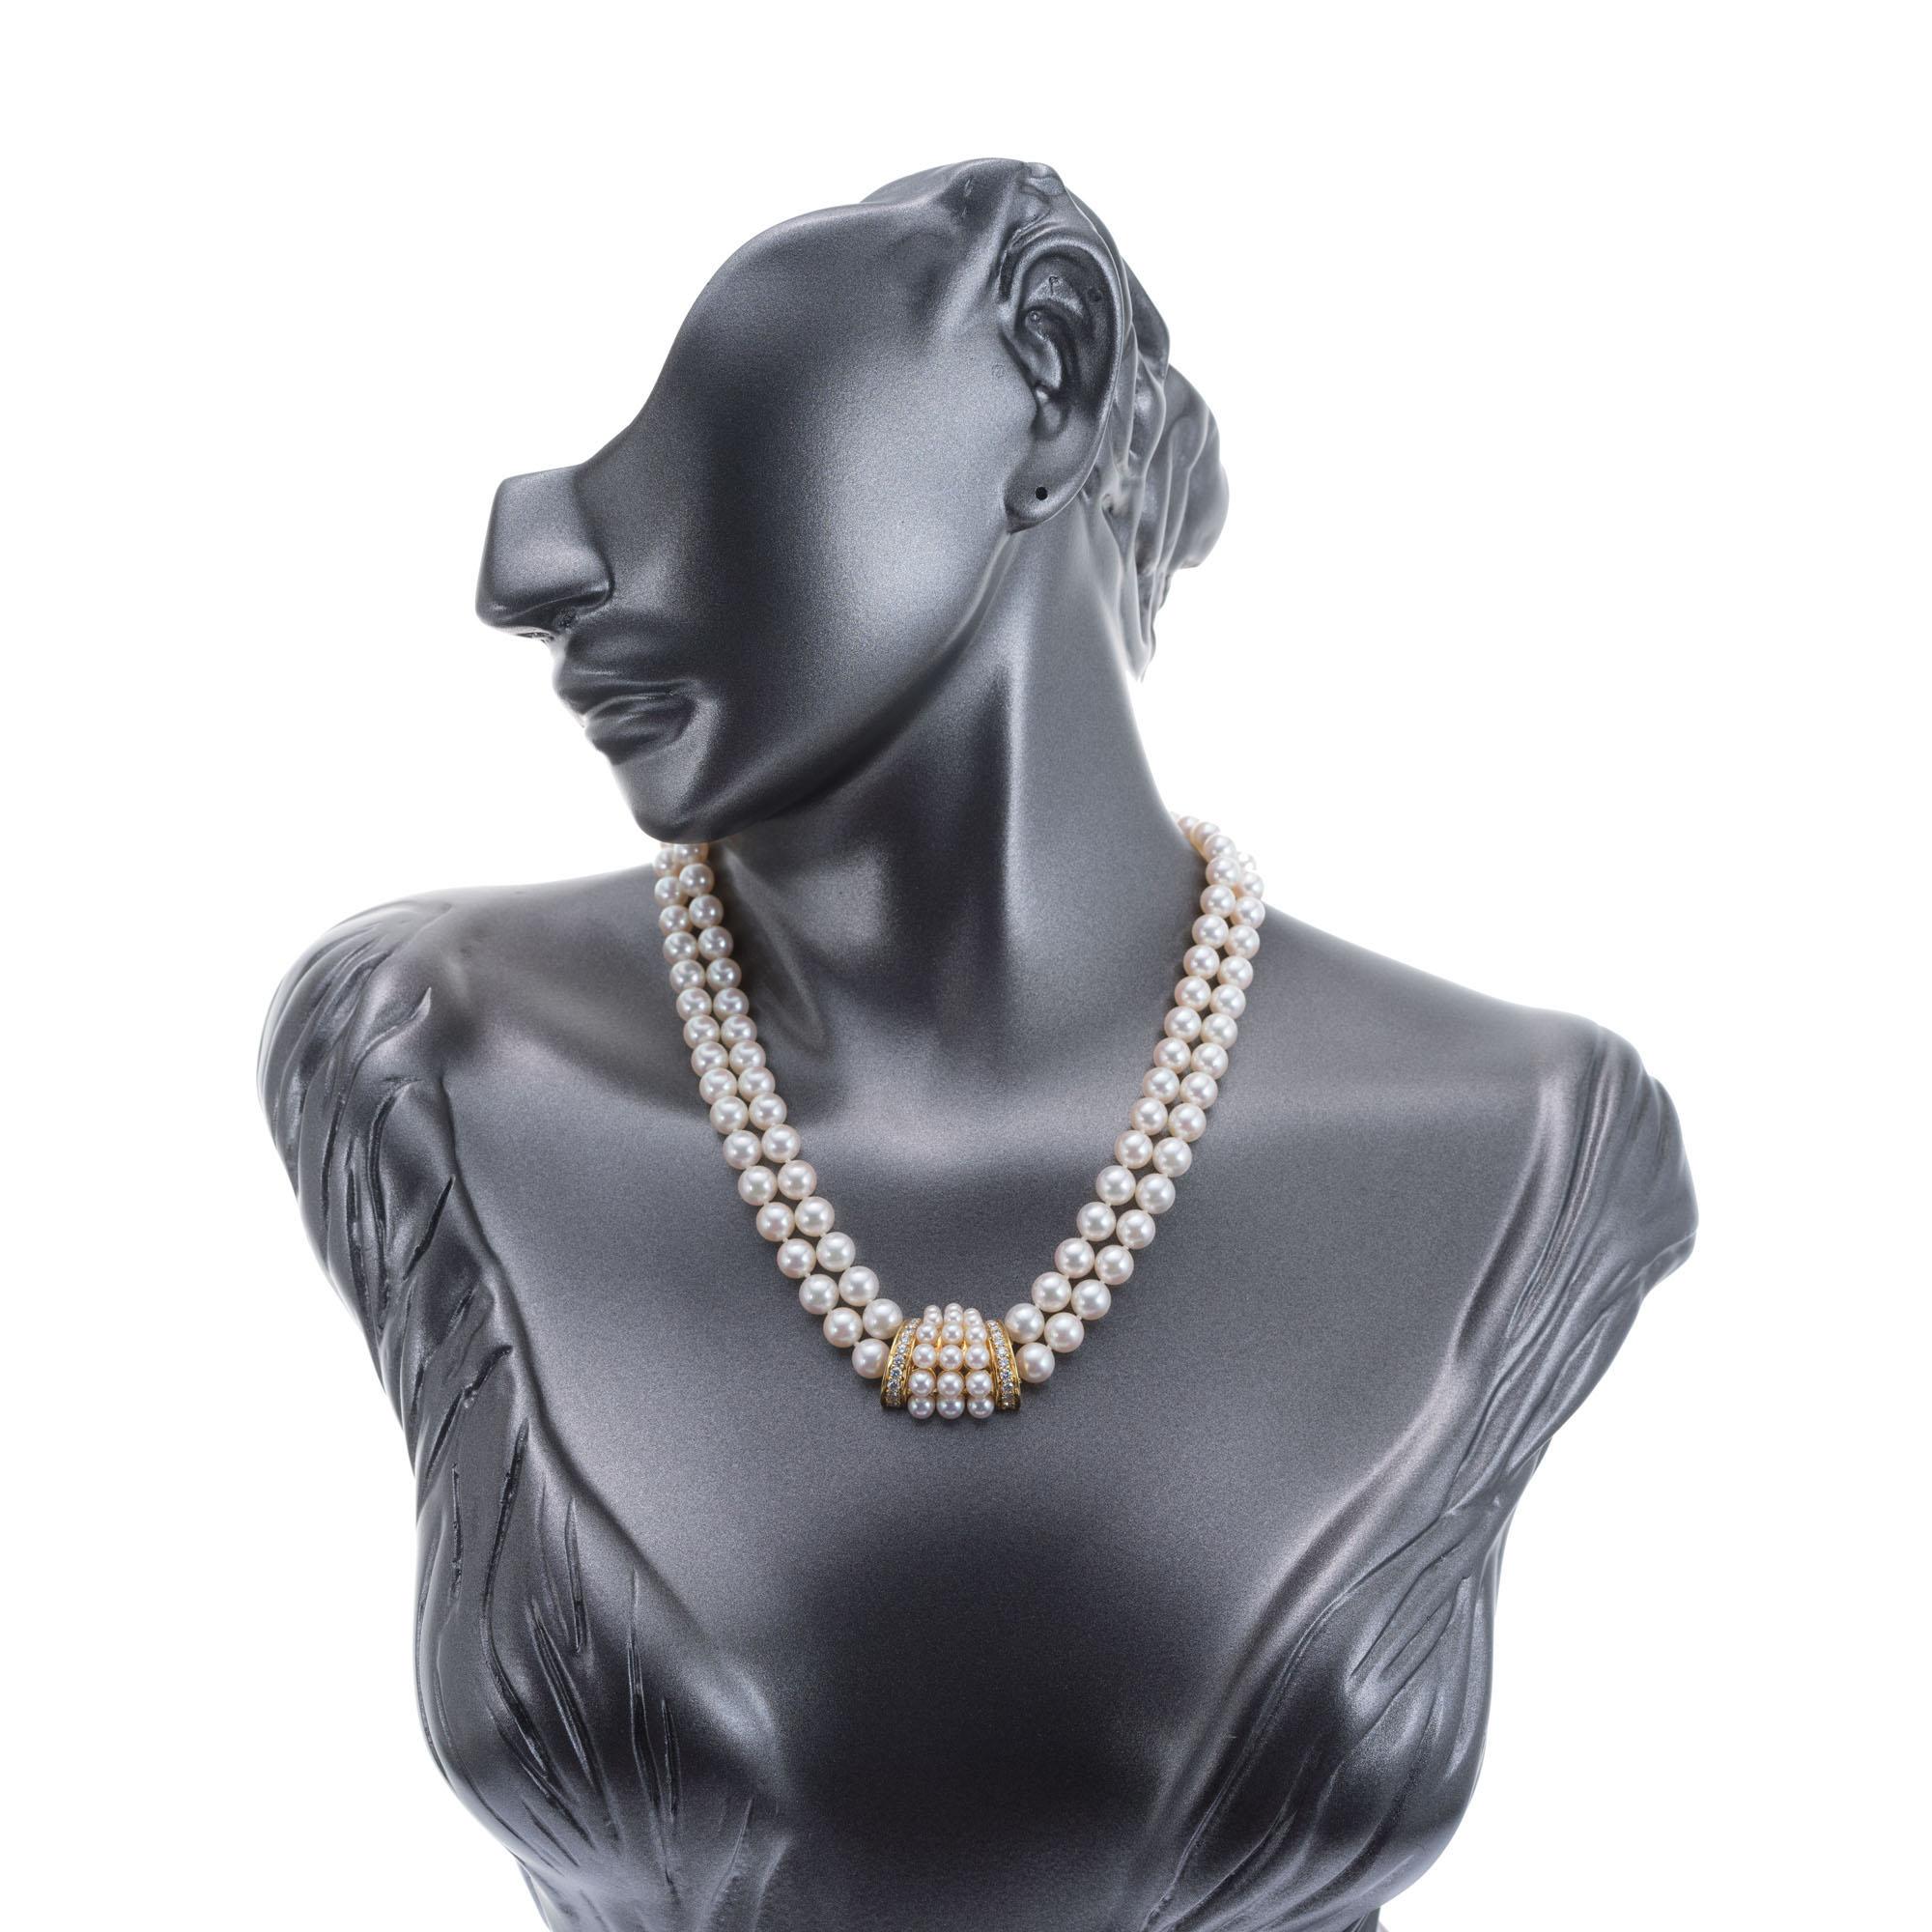 1960's Authentic certified Mikimoto double strand cultured pearl diamond necklace. Japanese cultured pearls with 22 full cut accent diamonds. 17-18 inches in length. Appraisal and restringing at Mikimoto. Stamps on back of catch and center section.